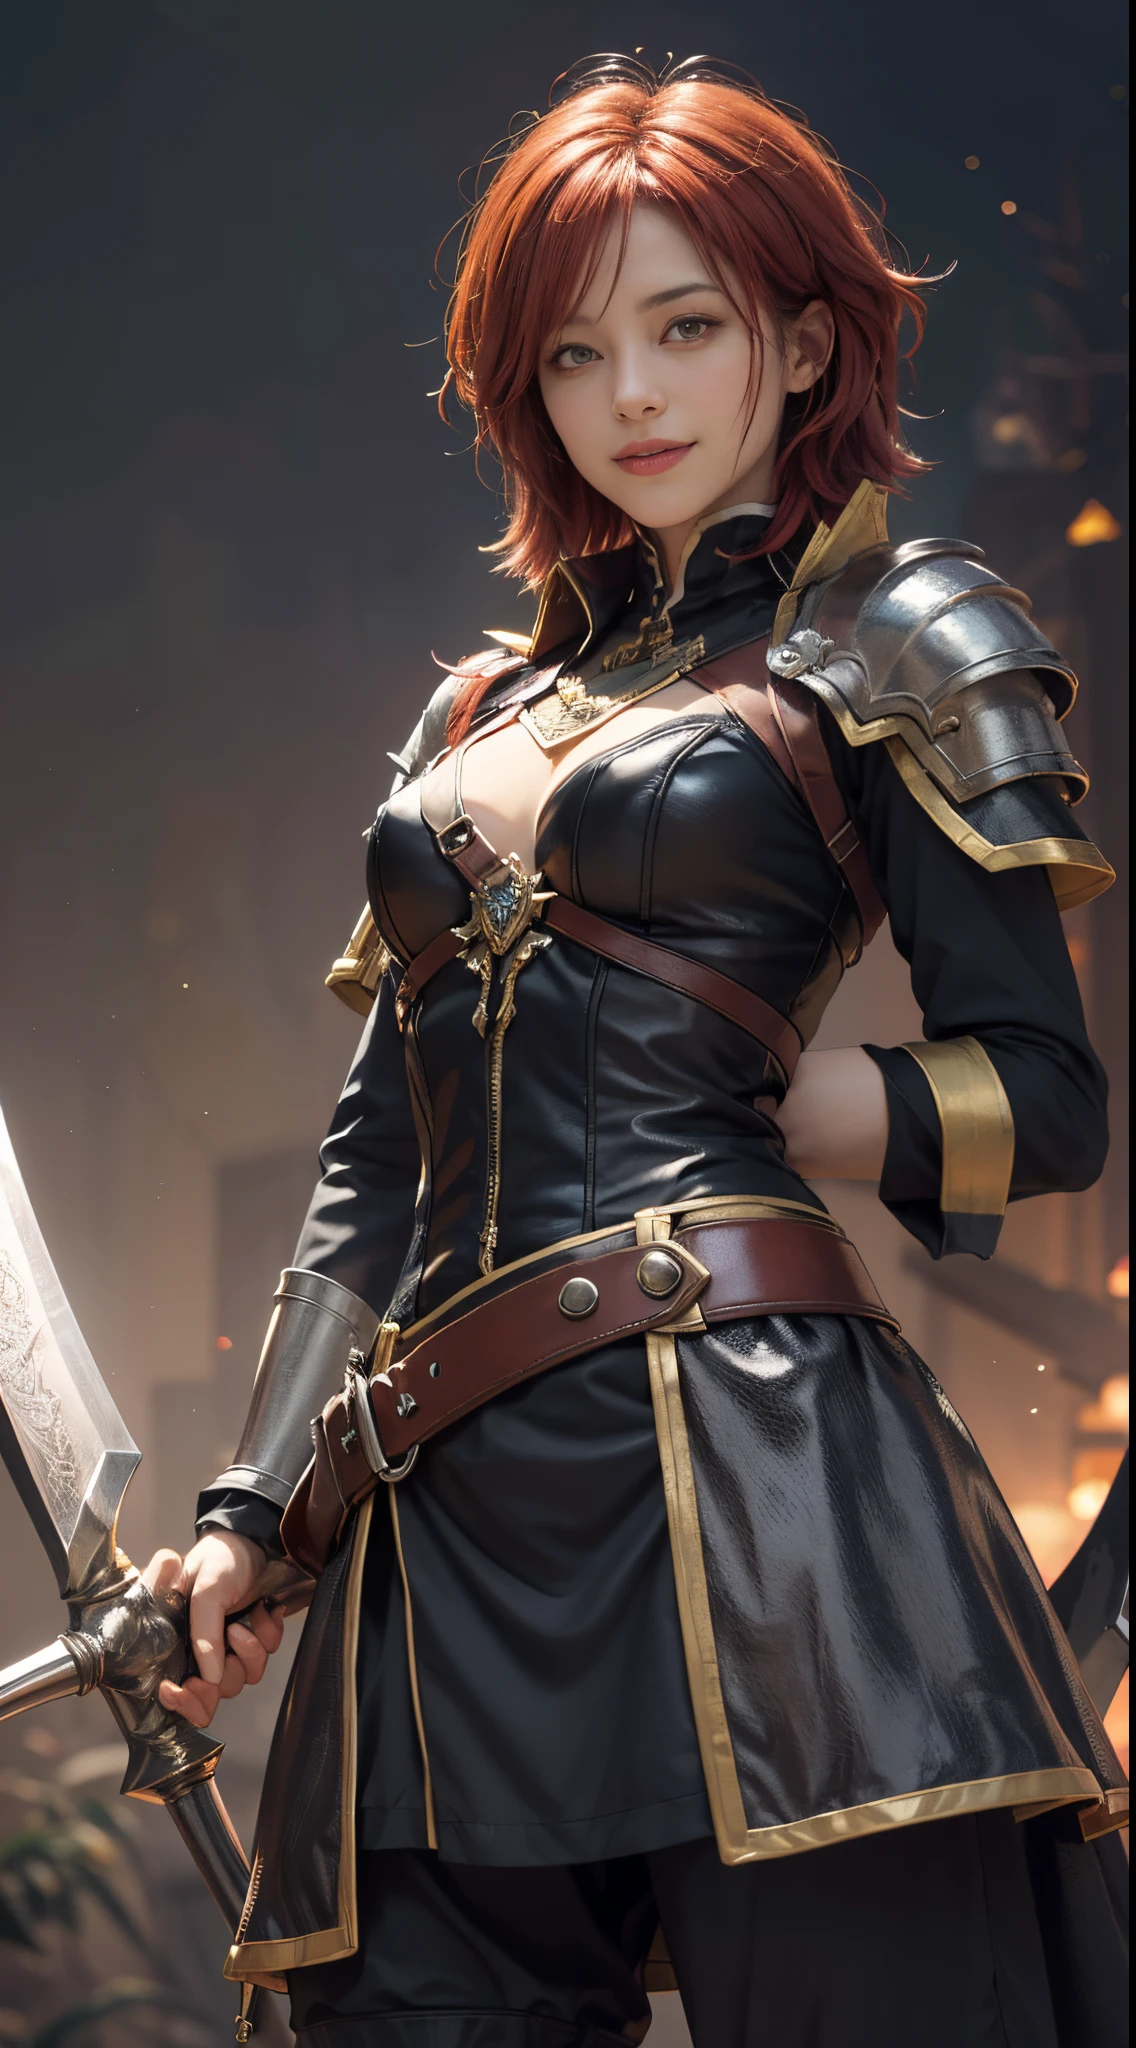 StarkFrieren, 8k, best quality, highres, realistic, real person, A warrior facing a demon lord, more lightly armored this time, with a mischievous, cunning smile. The warrior has short red hair and wields a large, ornately decorated axe. The setting is a fantasy battleground. The warrior's pose is more relaxed and sly, reflecting their crafty personality. The background includes magical effects and a dark, ominous atmosphere, emphasizing the ongoing battle.